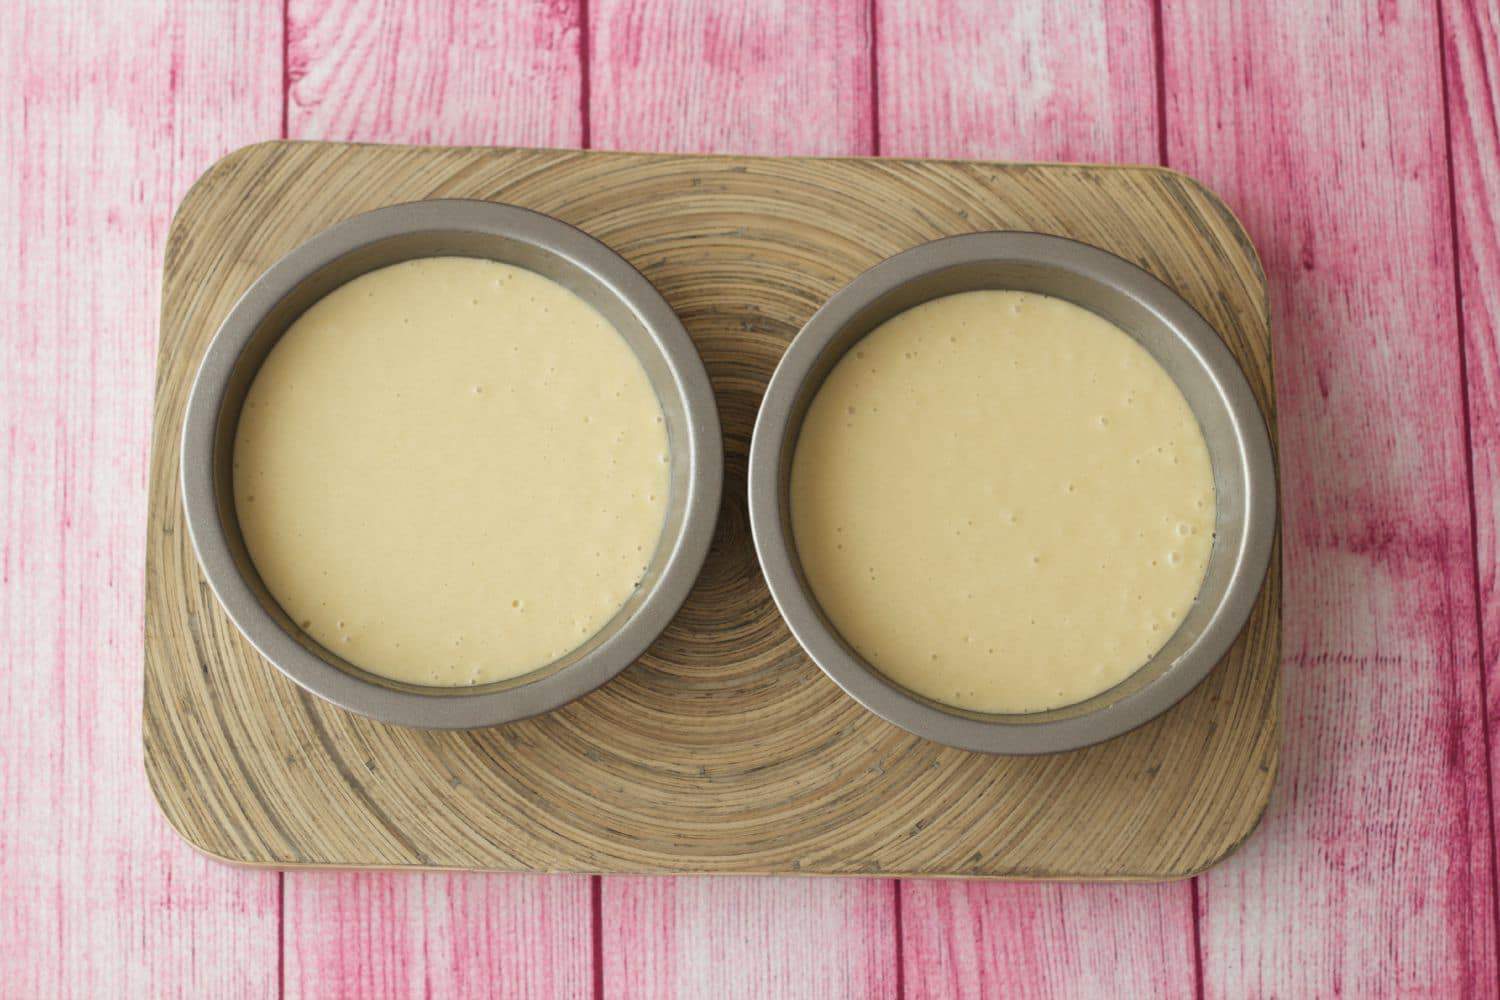 Vegan vanilla cake batter in two cake pans ready to go into the oven.